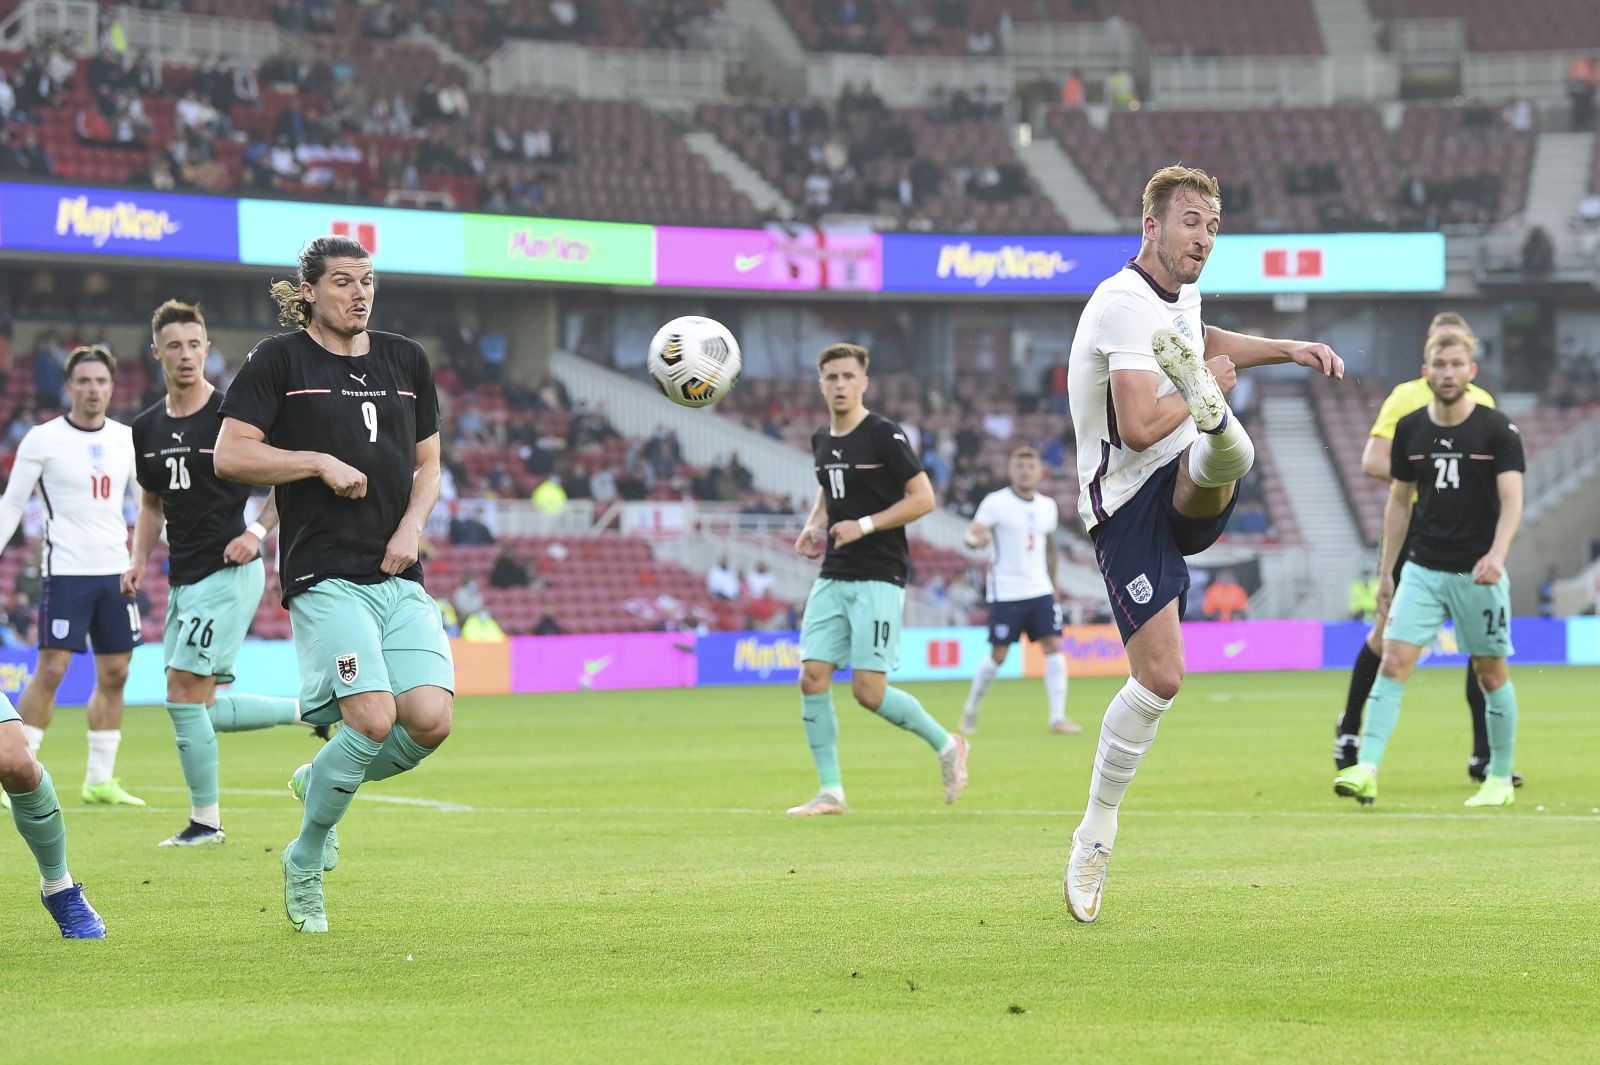 epa09243809 England's Harry Kane (R) in action against Austria's Marcel Sabitzer (L) during the International Friendly soccer match between England and Austria in Middlesbrough, Britain, 02 June 2021.  EPA/Peter Powell / POOL